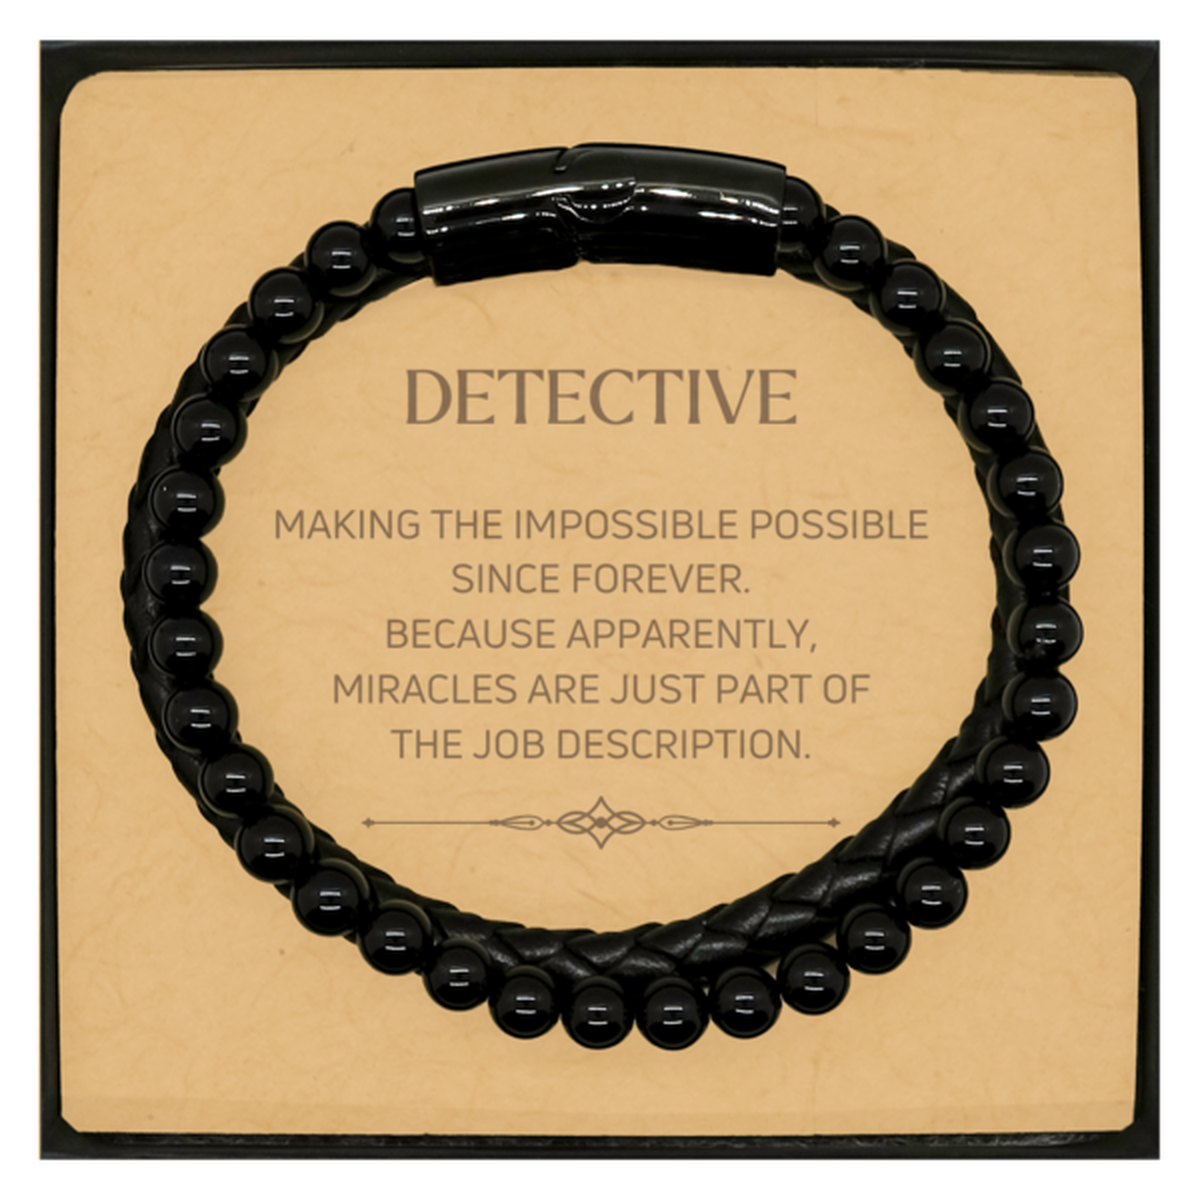 Funny Detective Gifts, Miracles are just part of the job description, Inspirational Birthday Christmas Stone Leather Bracelets For Detective, Men, Women, Coworkers, Friends, Boss